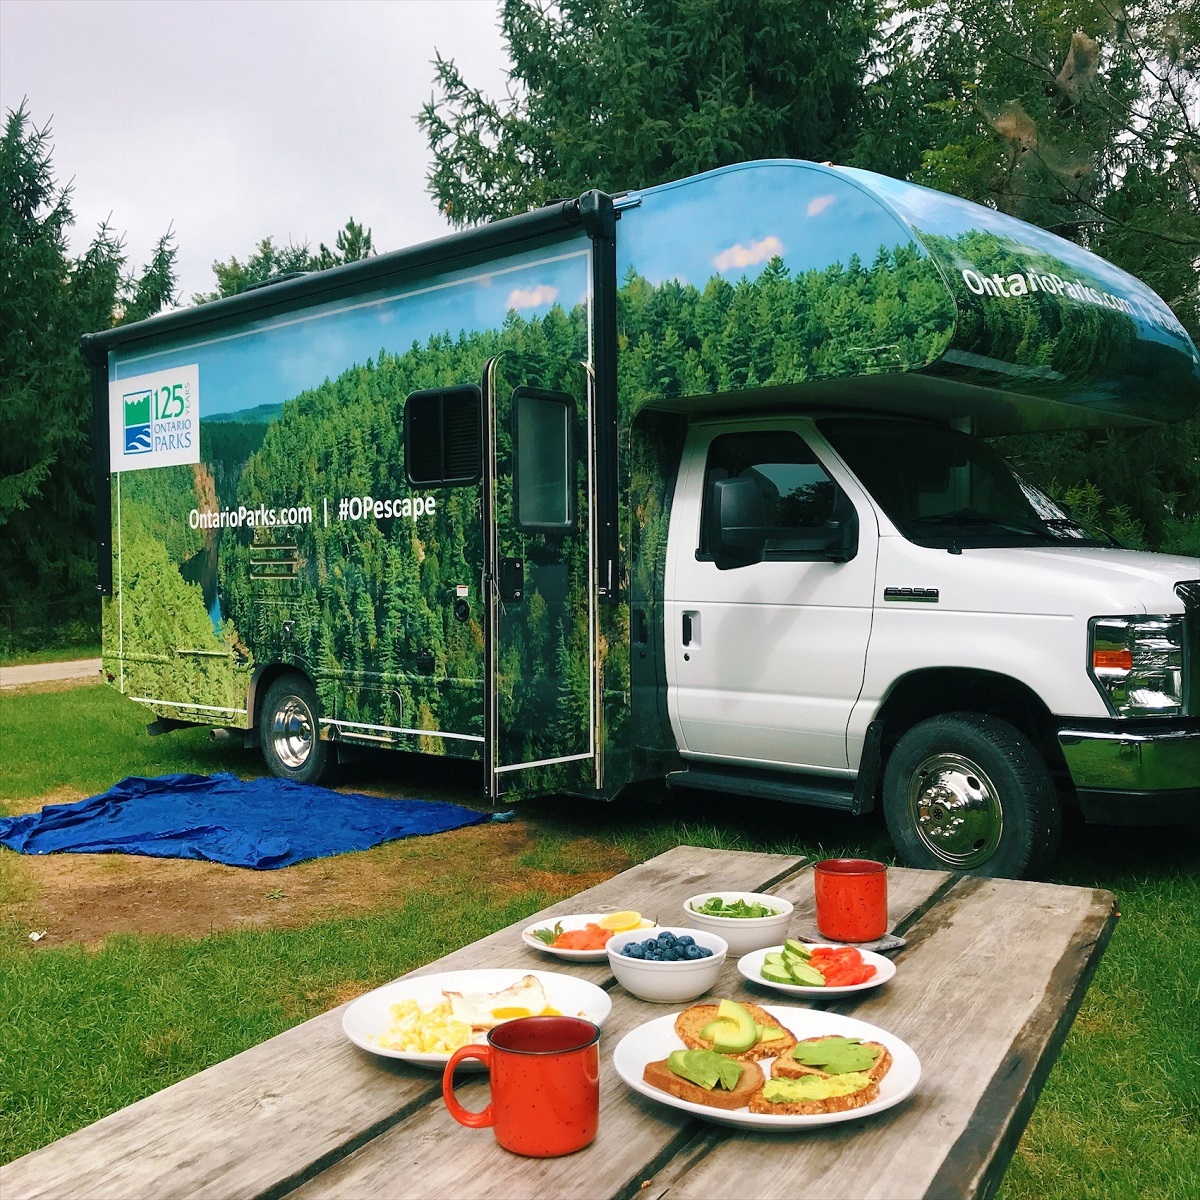 Wrapped RV on a campsite in the background of a delicious healthy meal on a picnic table